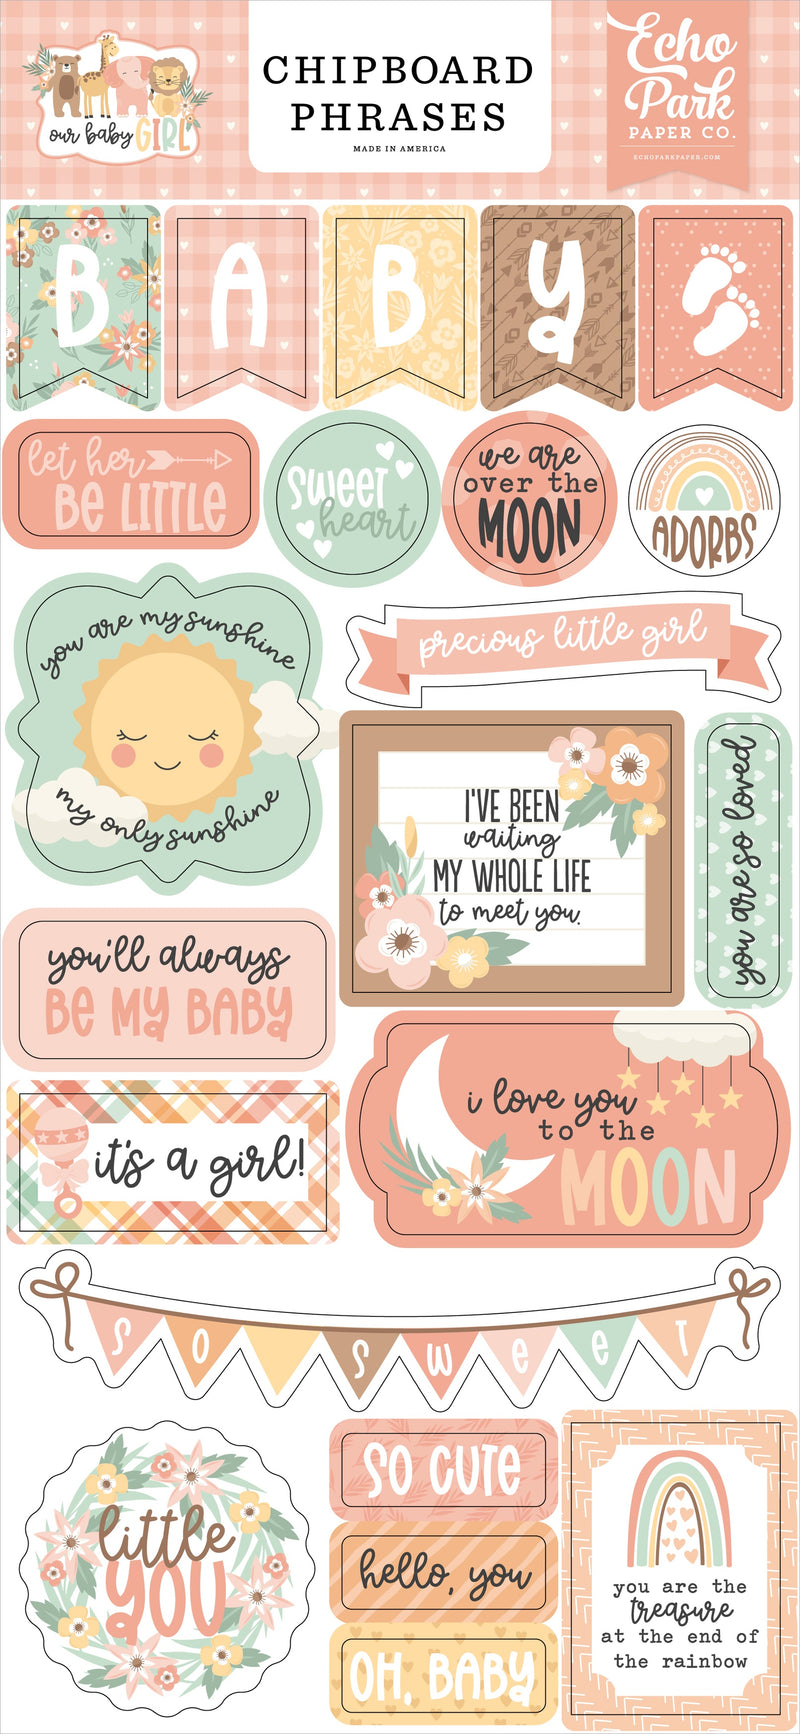 Our Baby Girl Chipboard Phrases